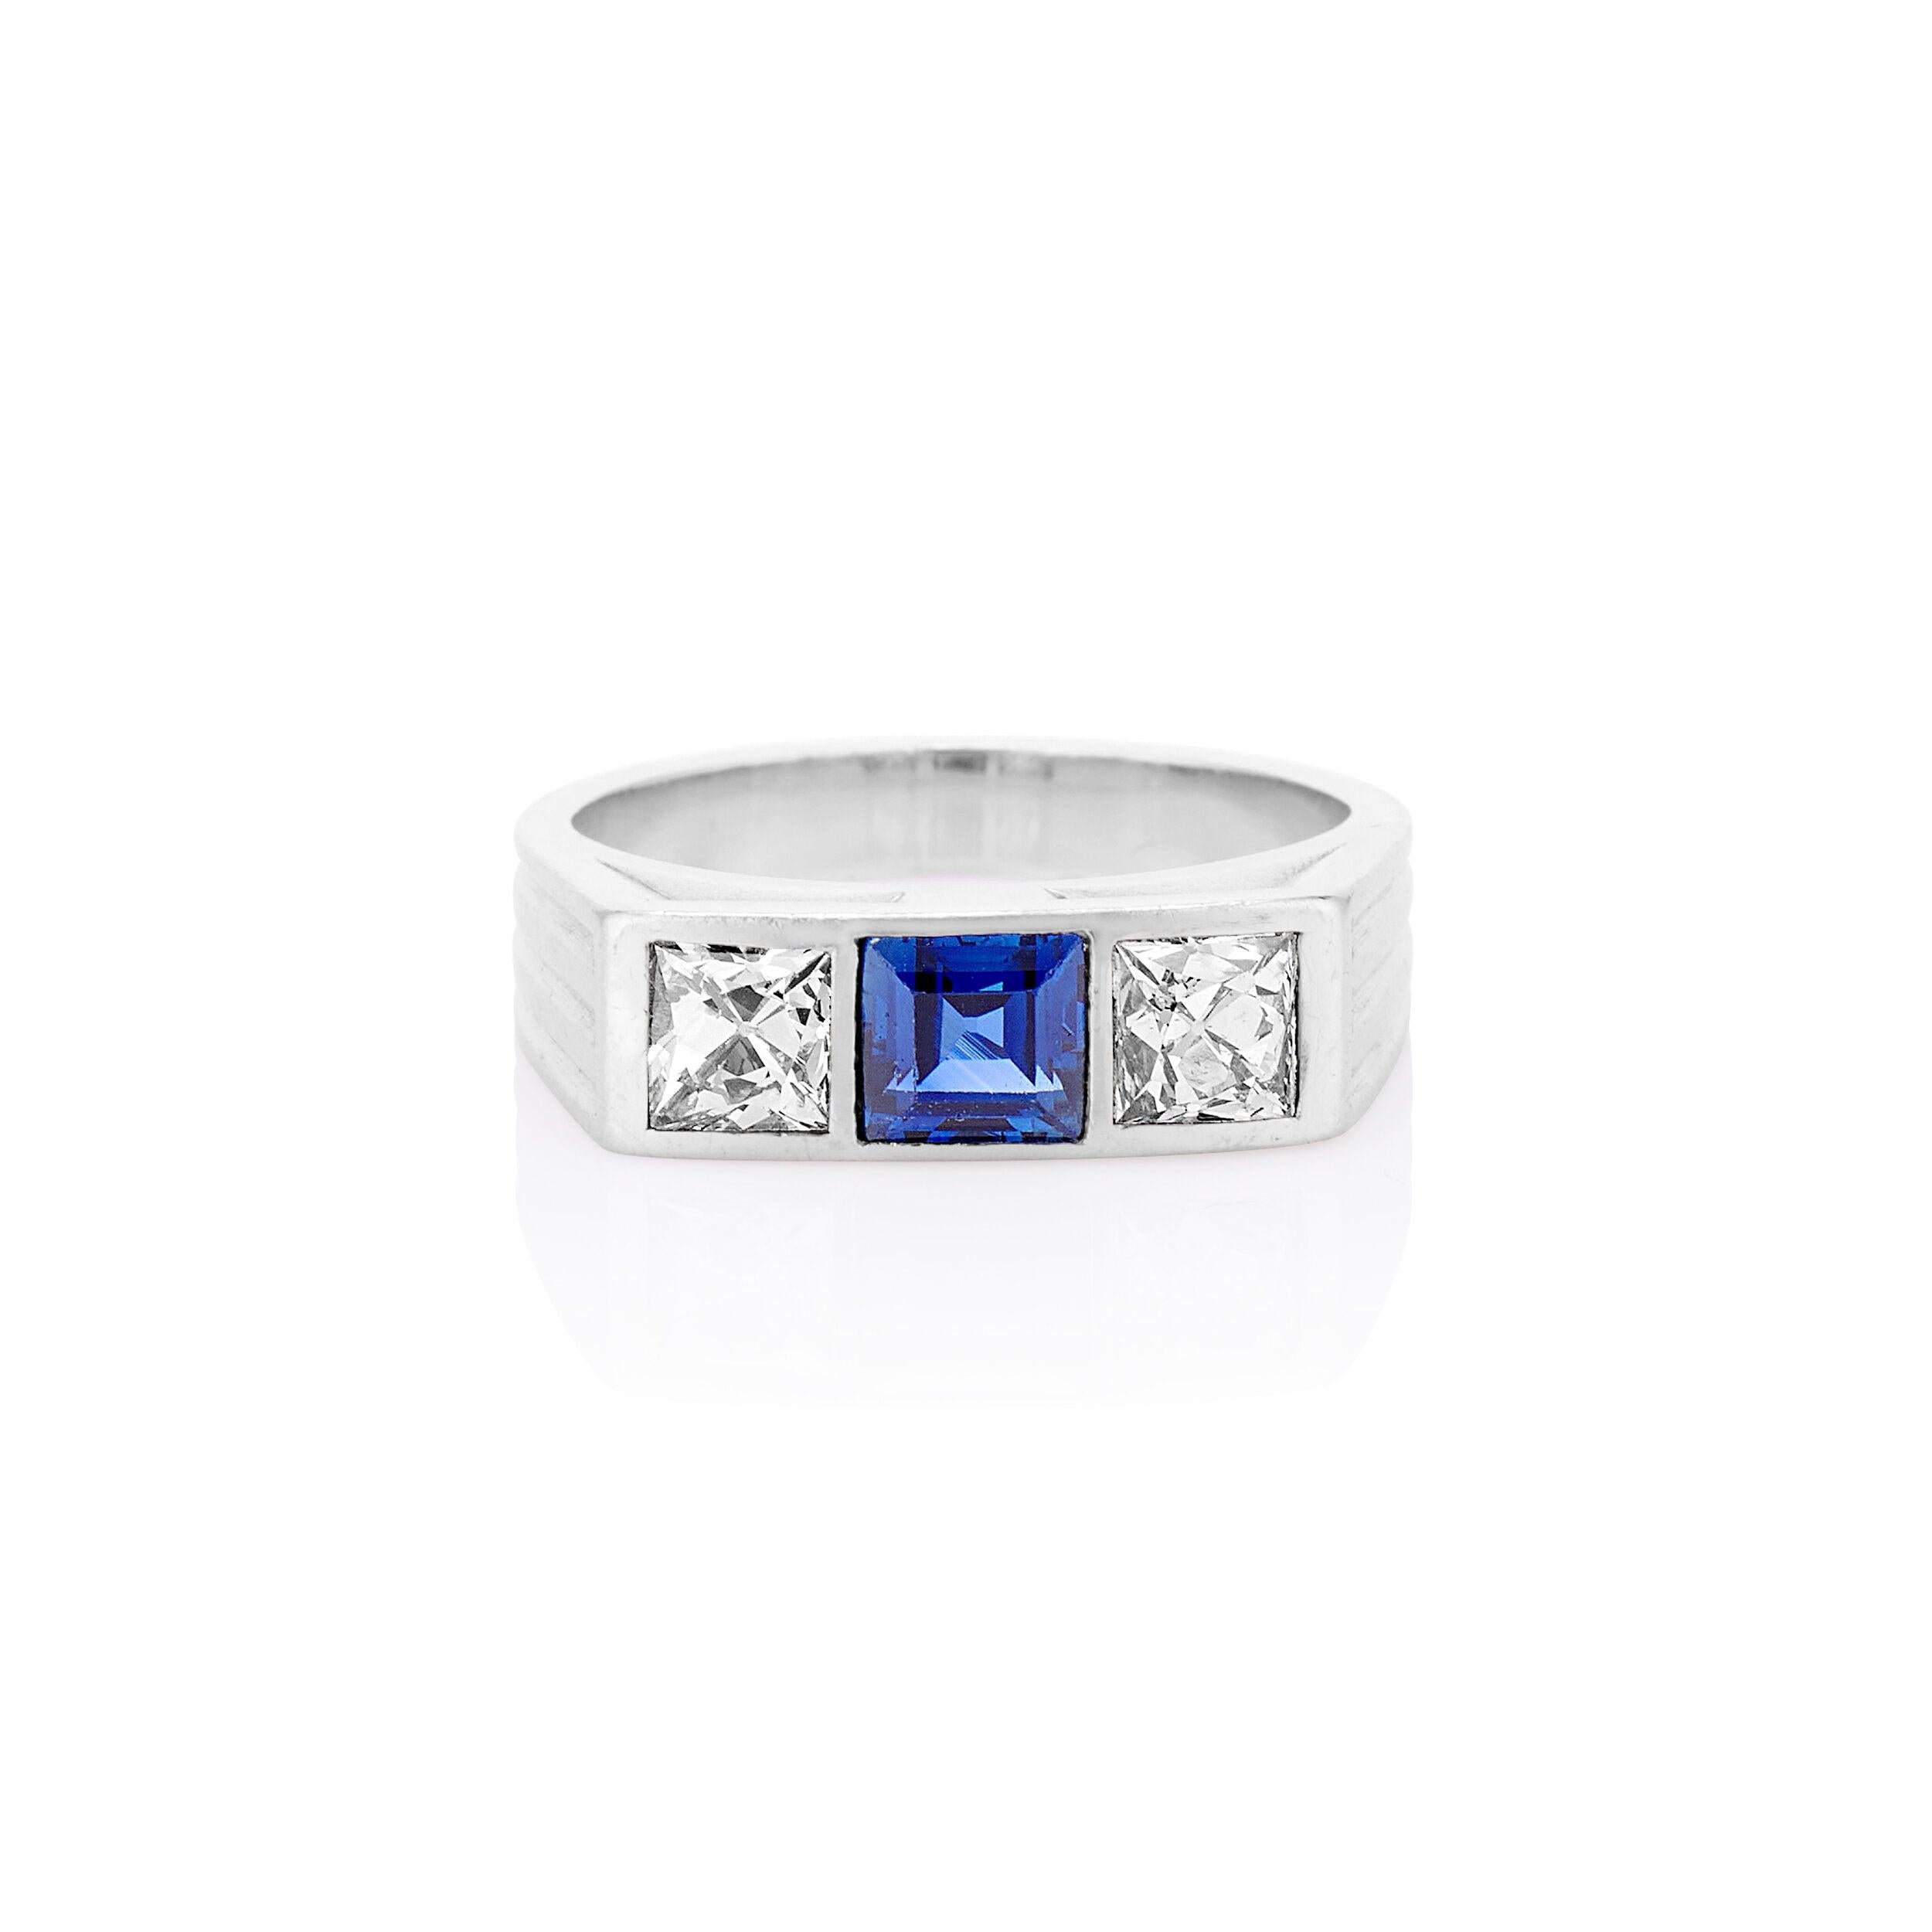 A sleek and refined 1930’s three stone band ring, beautifully crafted in platinum, this ring centers on a radiant natural blue sapphire centered between two bright-white French-cut diamonds. Absolutely stunning. Currently a ring size 6